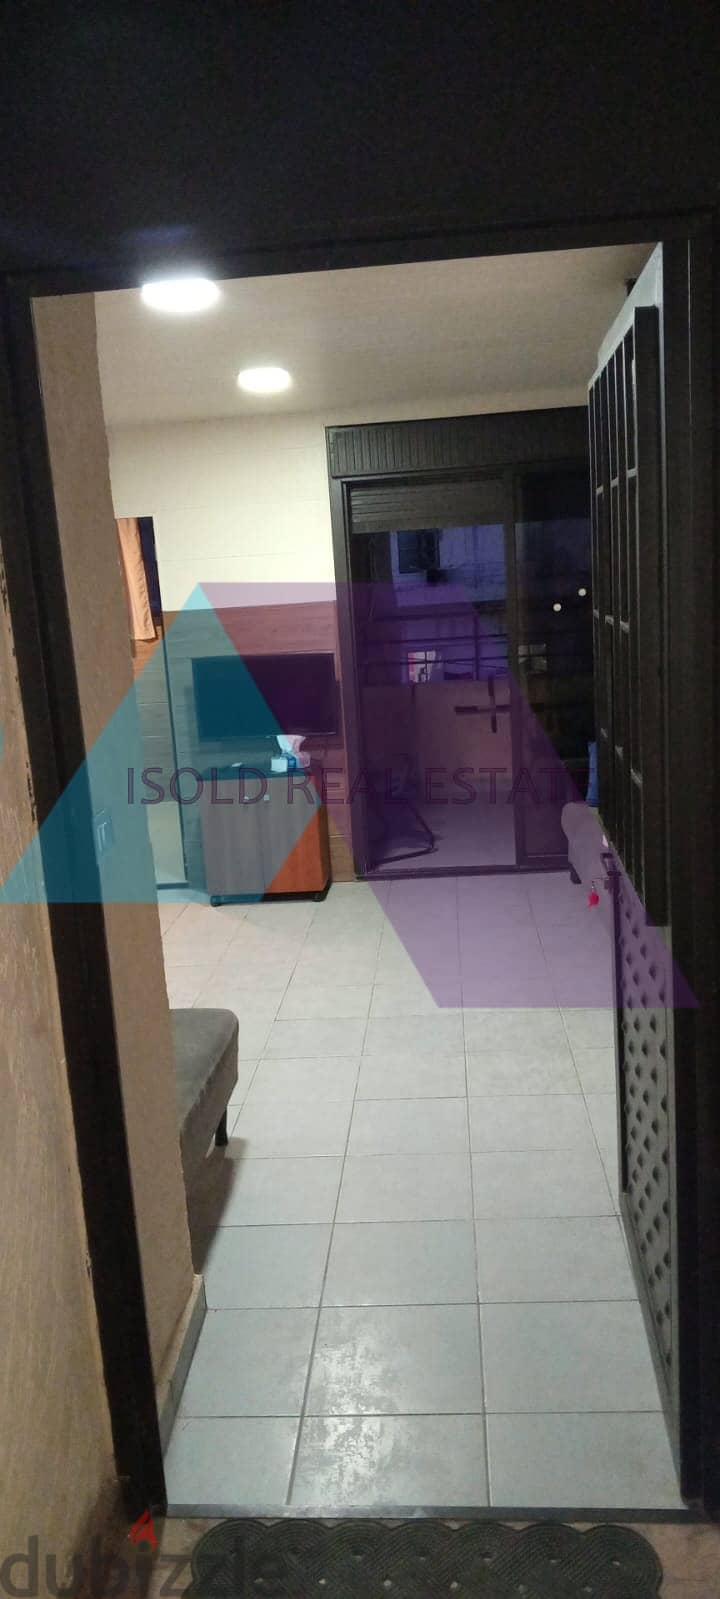 Including Elec. + Net - Furnished 50m2 apartment for rent in Achrafieh 2